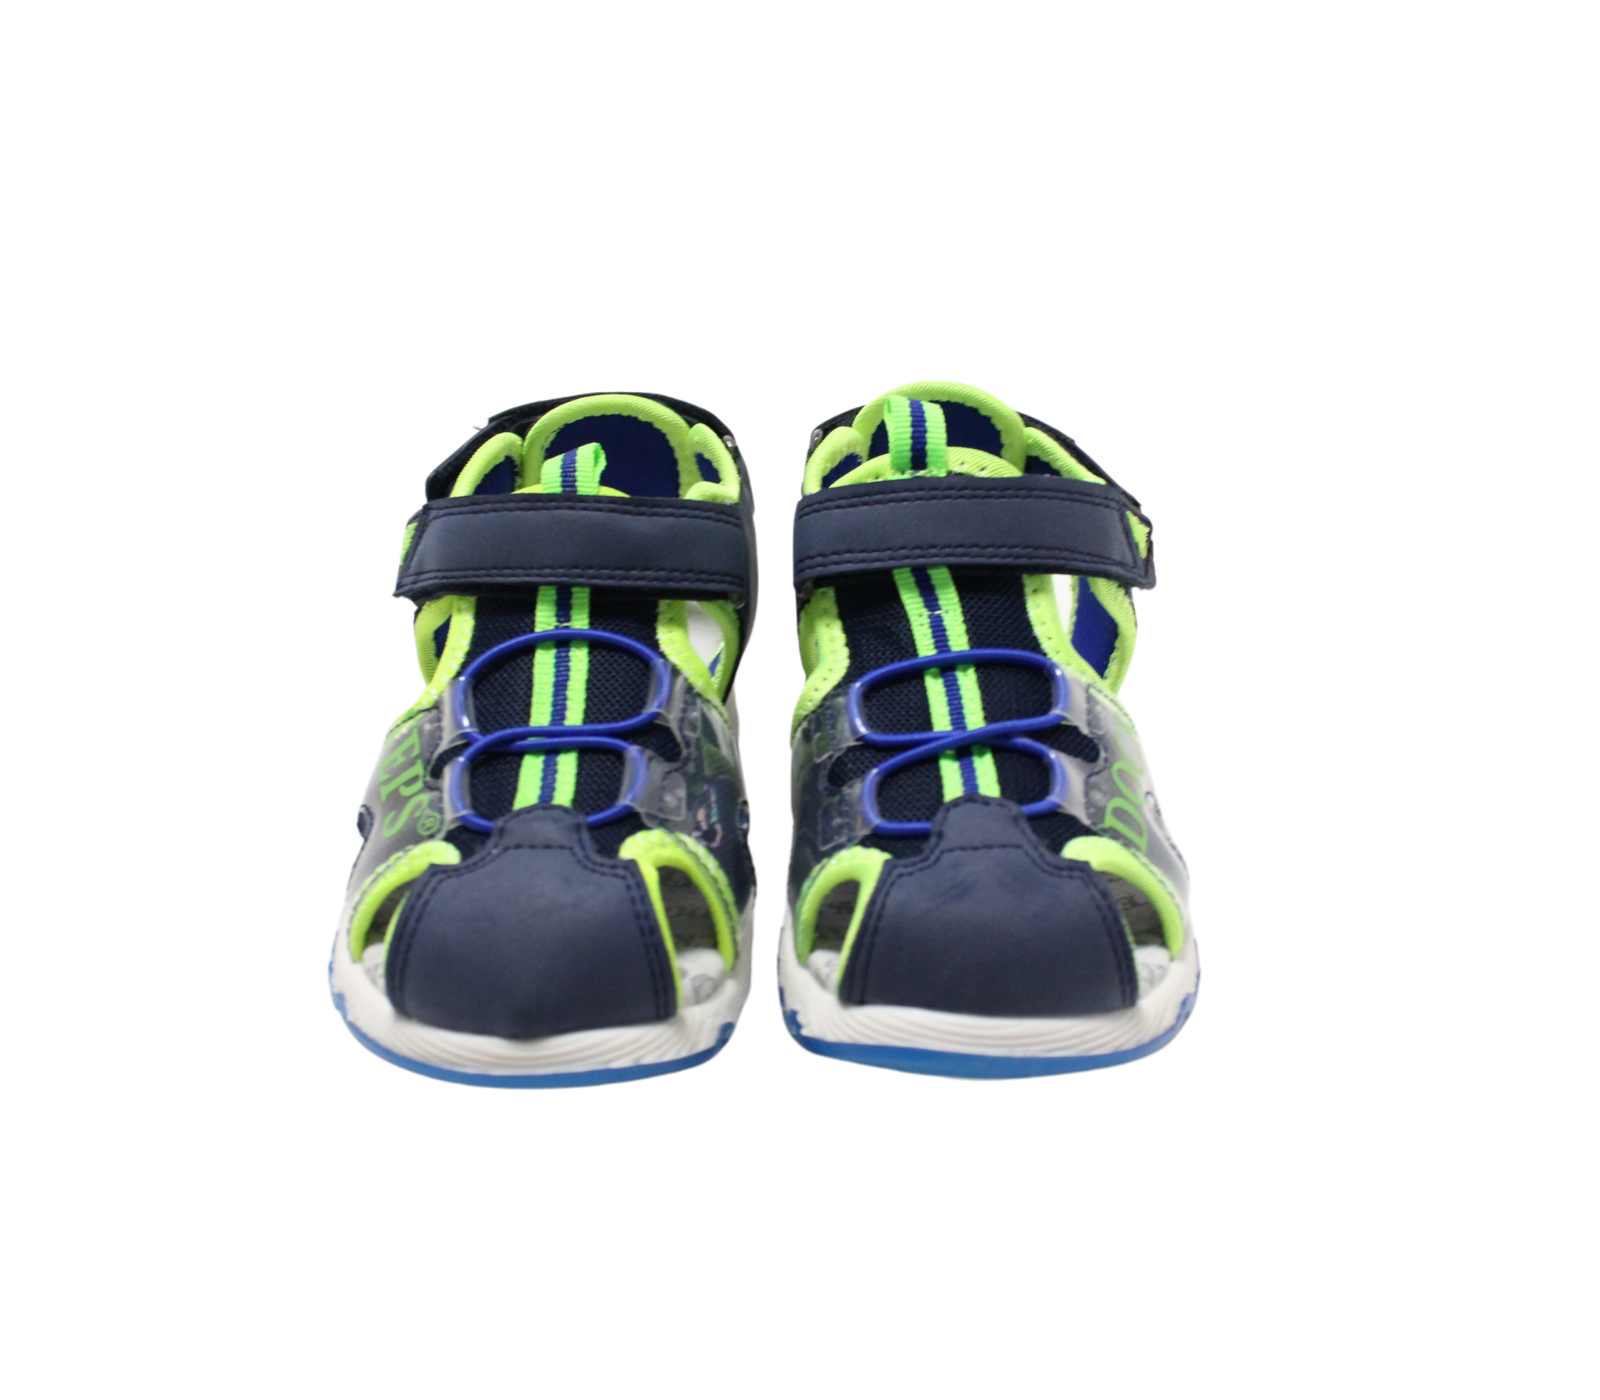 Blue Simil leather baby sandals and Velcro closure